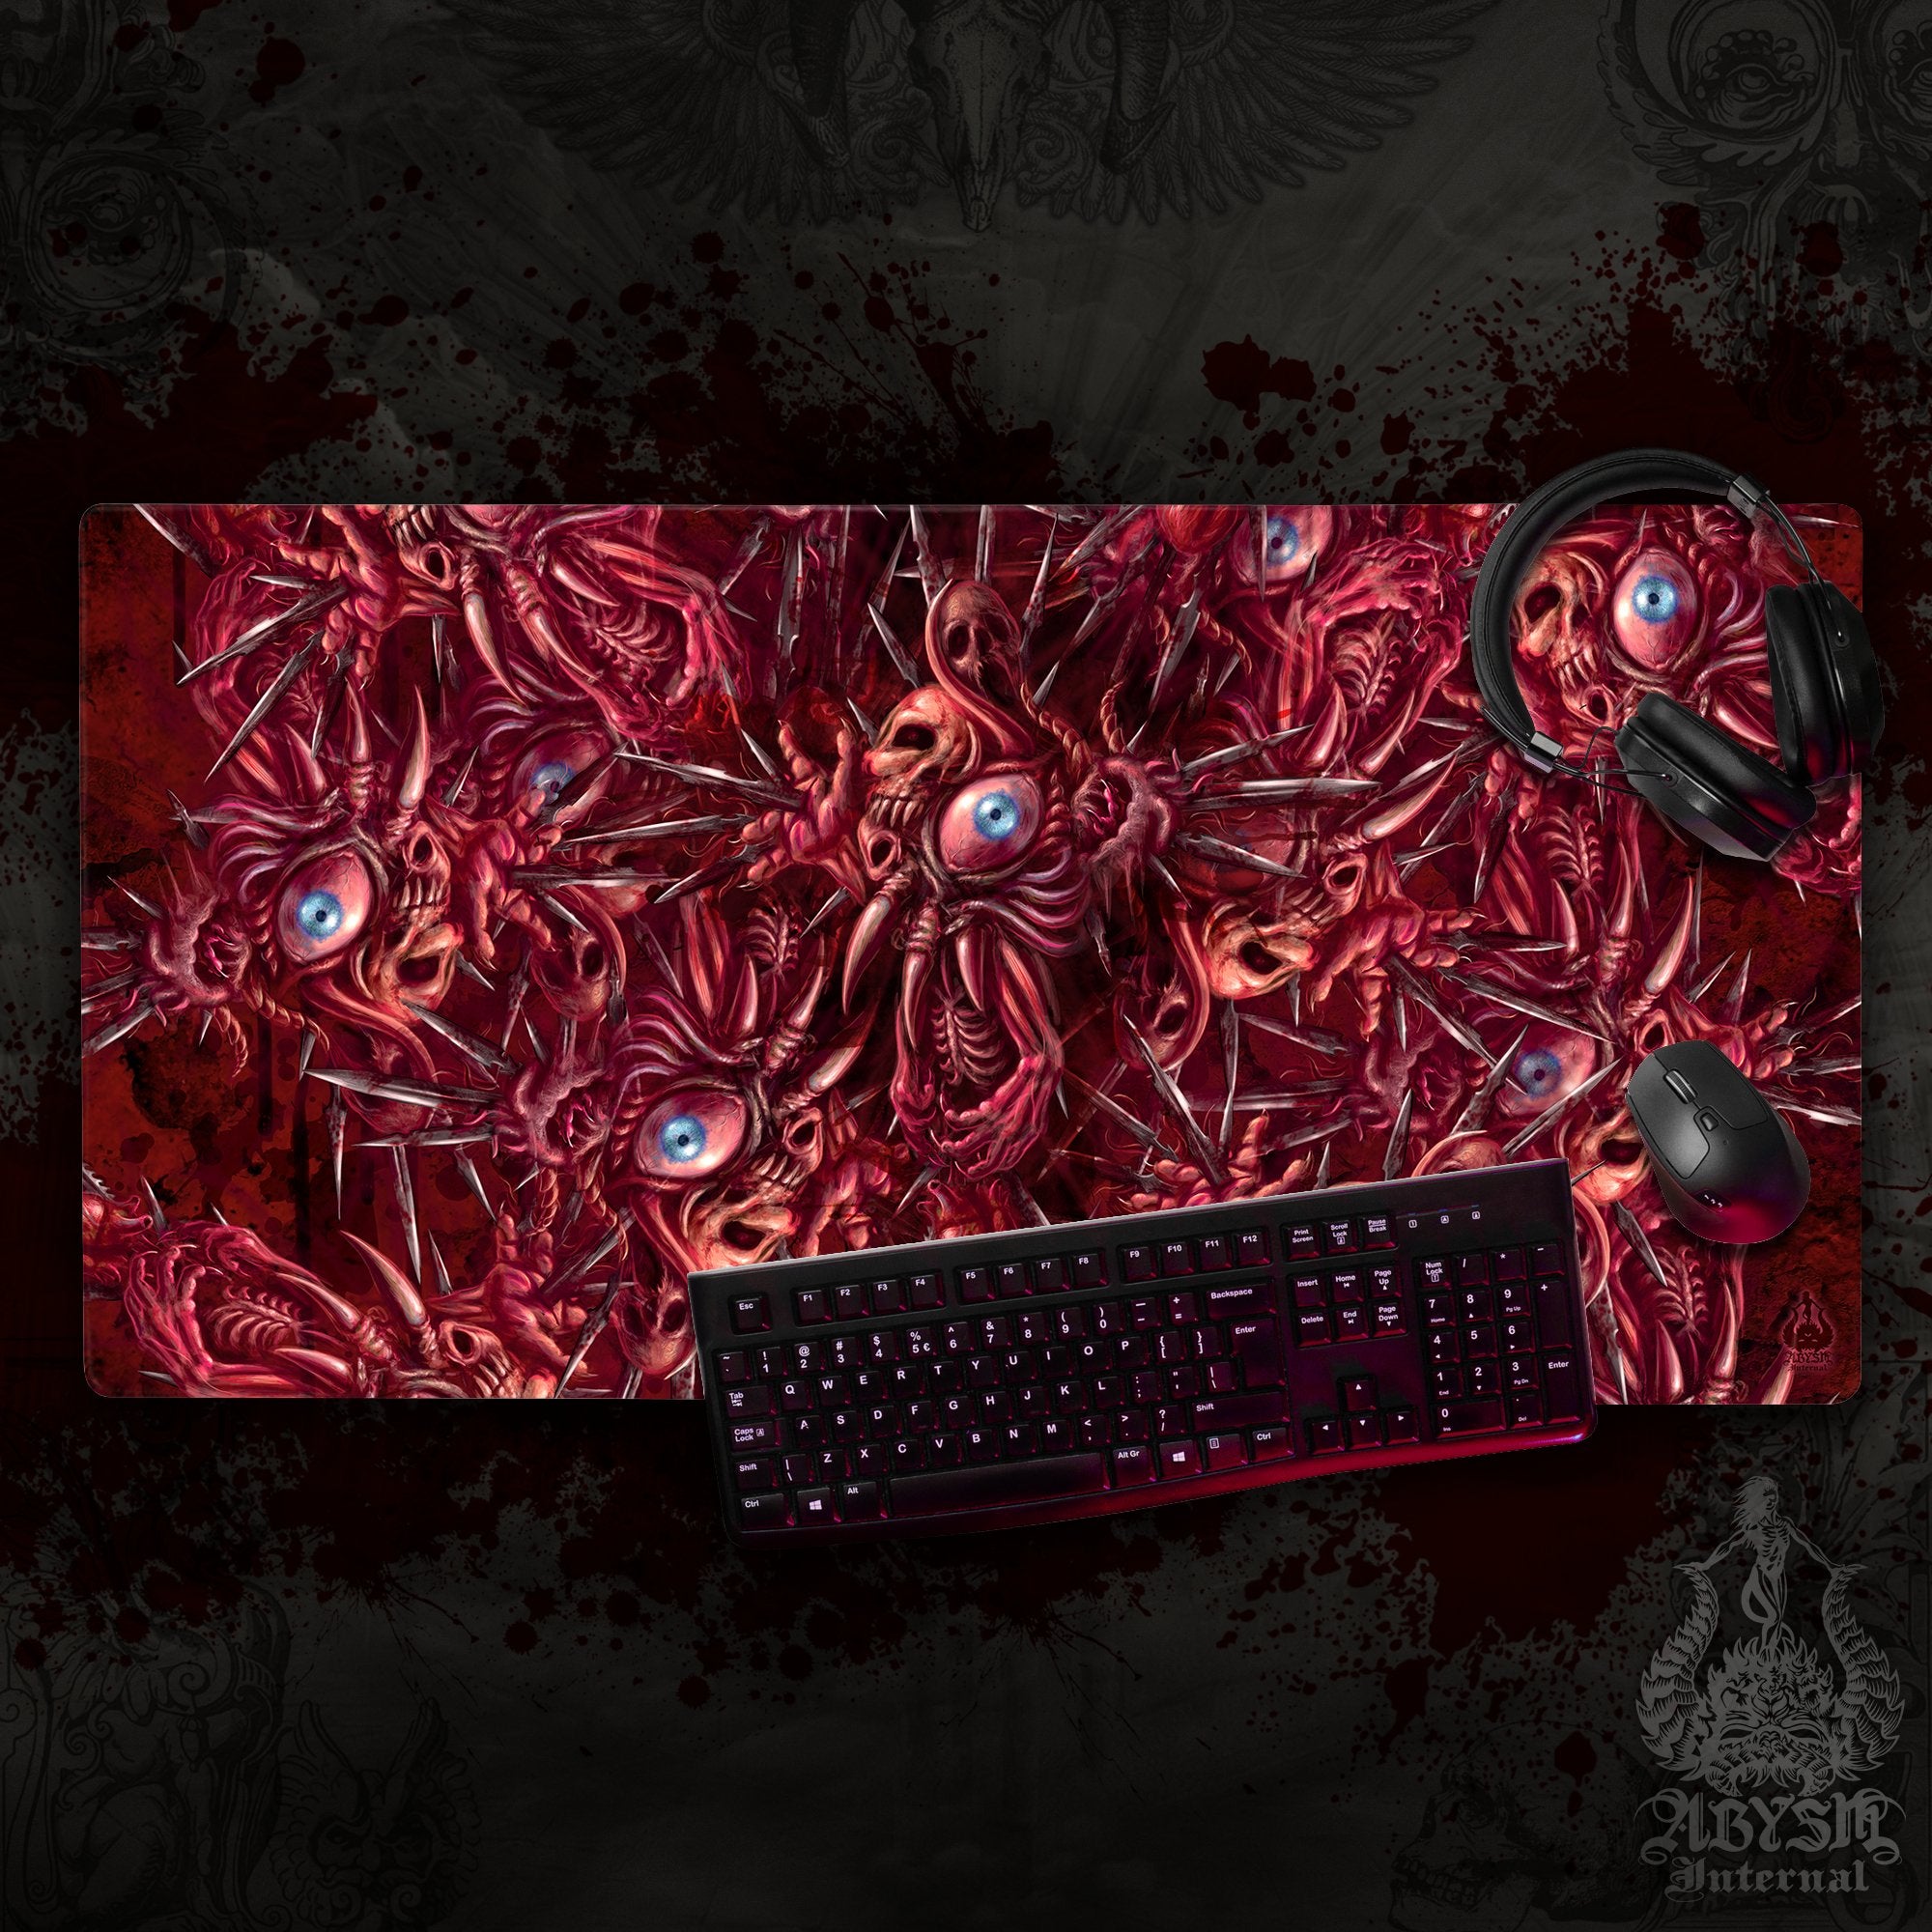 Halloween Desk Mat, Horror Gaming Mouse Pad, Eyeballs Table Protector Cover, Gore and Blood Cross Workpad, Scary Dark Fantasy Art Print - Abysm Internal